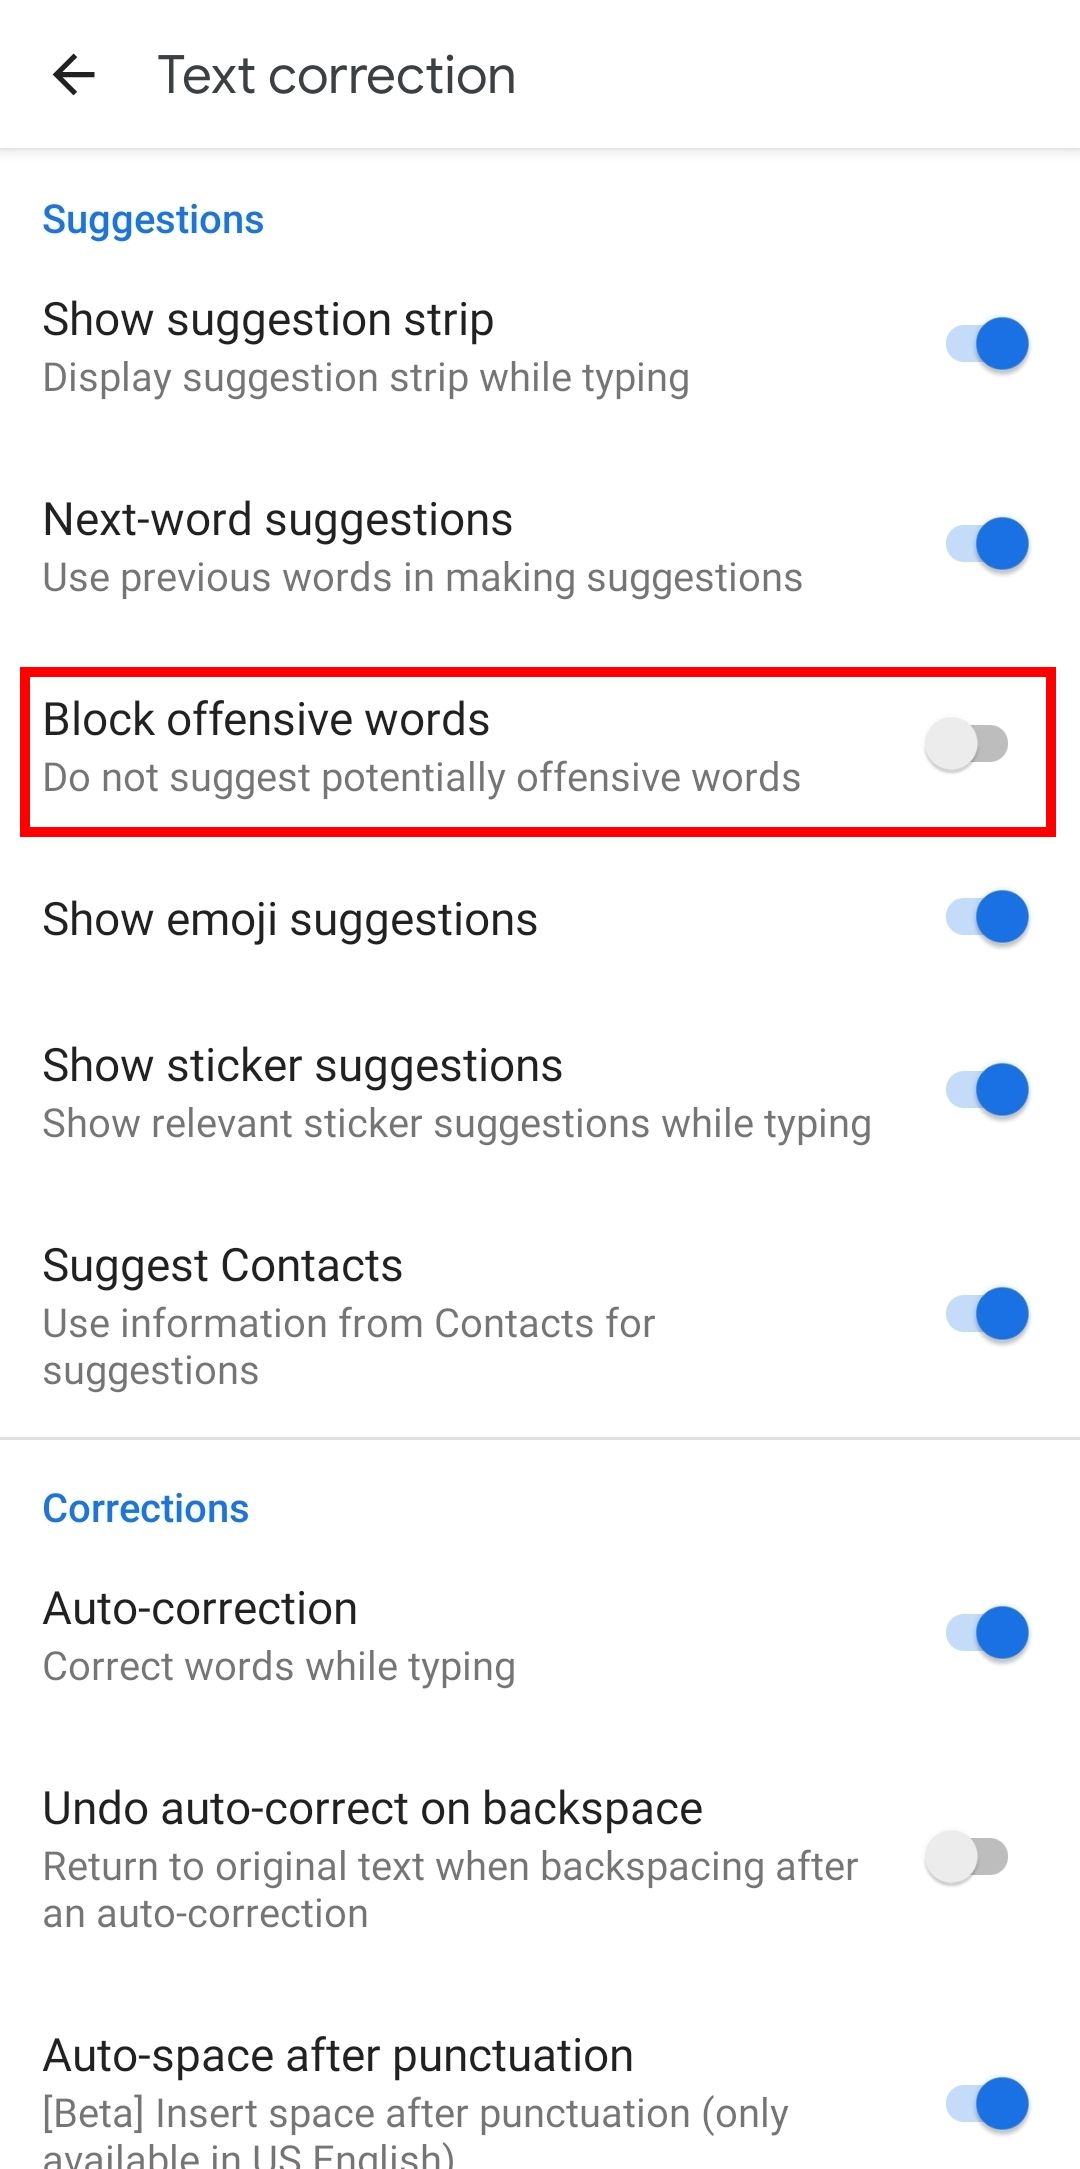 in the text-correction menu, the "block offensive words" option is highlighted